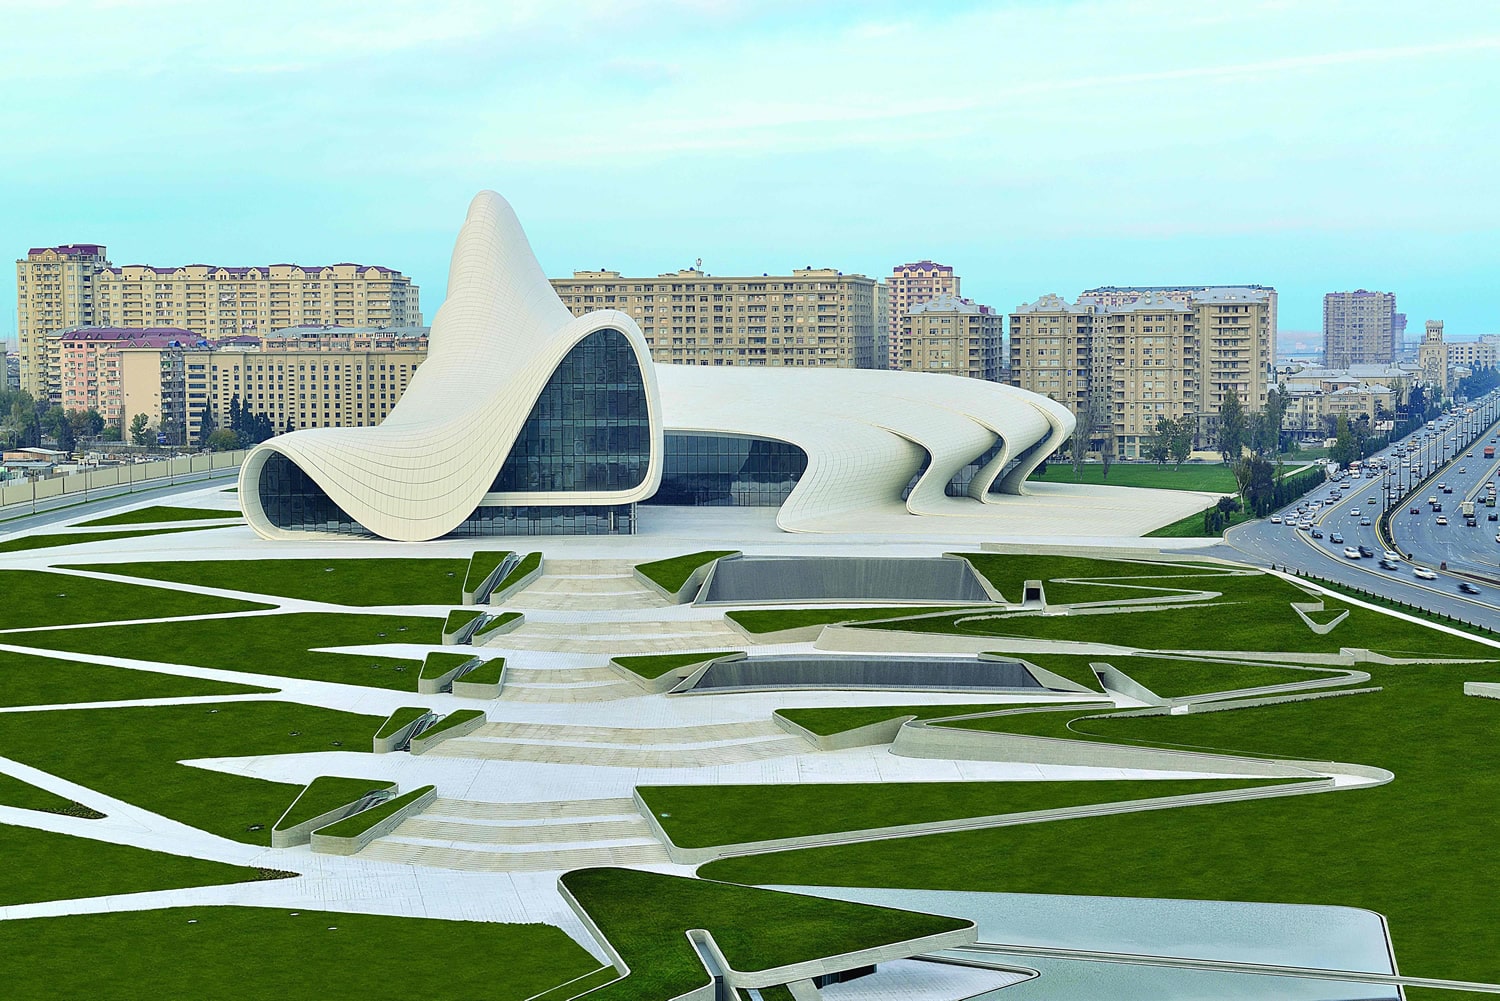 Entertainment building: photo of the Heydar Aliyev Cultural Center, designed by Zaha Hadid